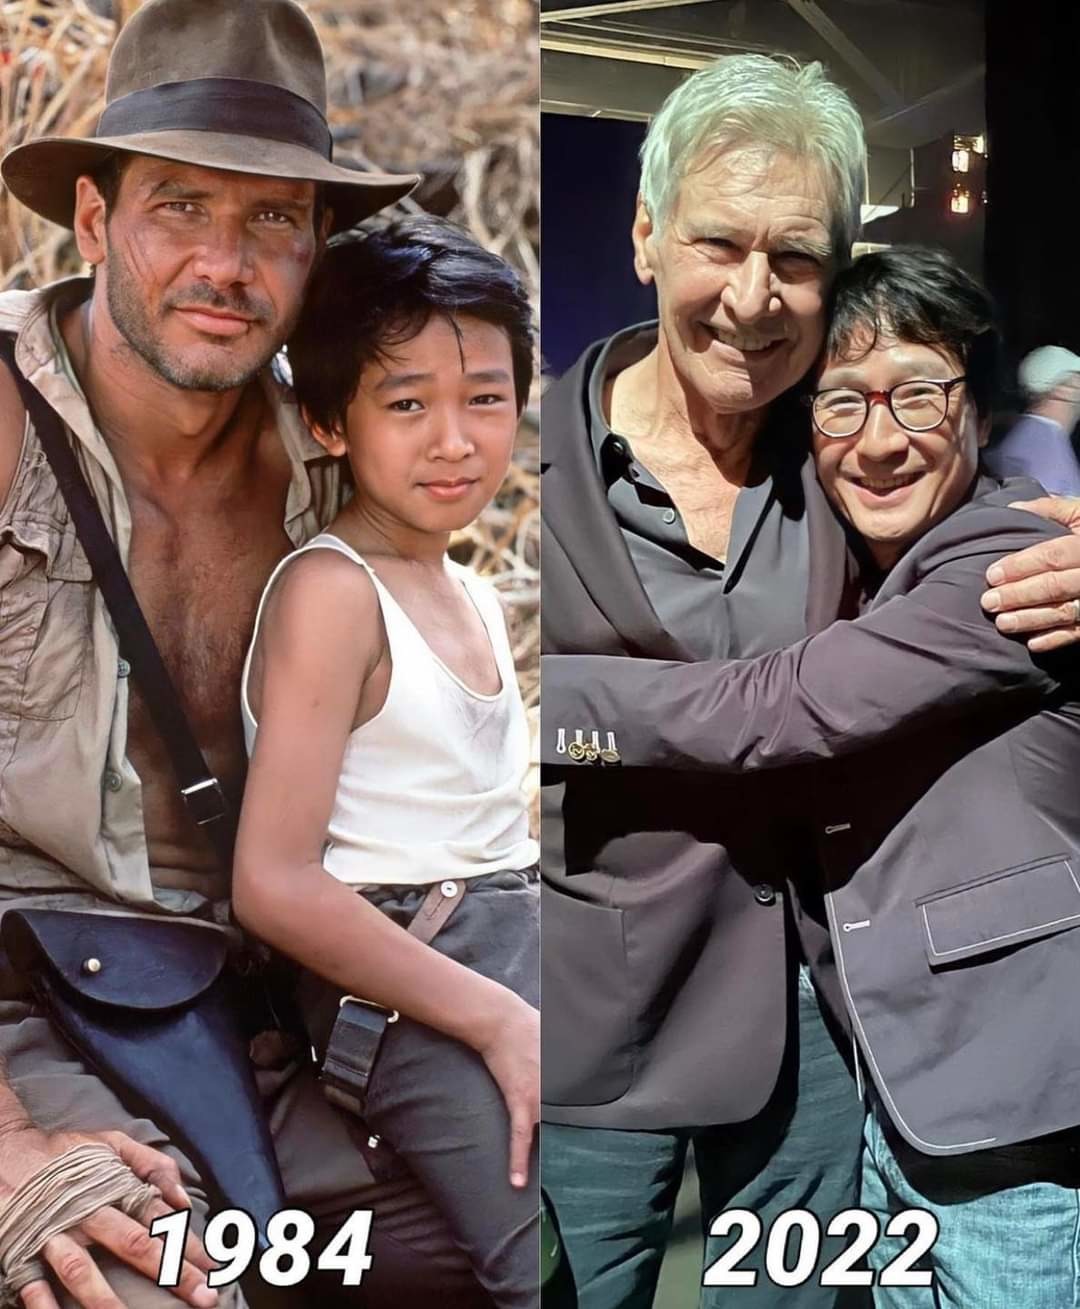 Indiana Jones reunion with Short Round after 38 years - meme